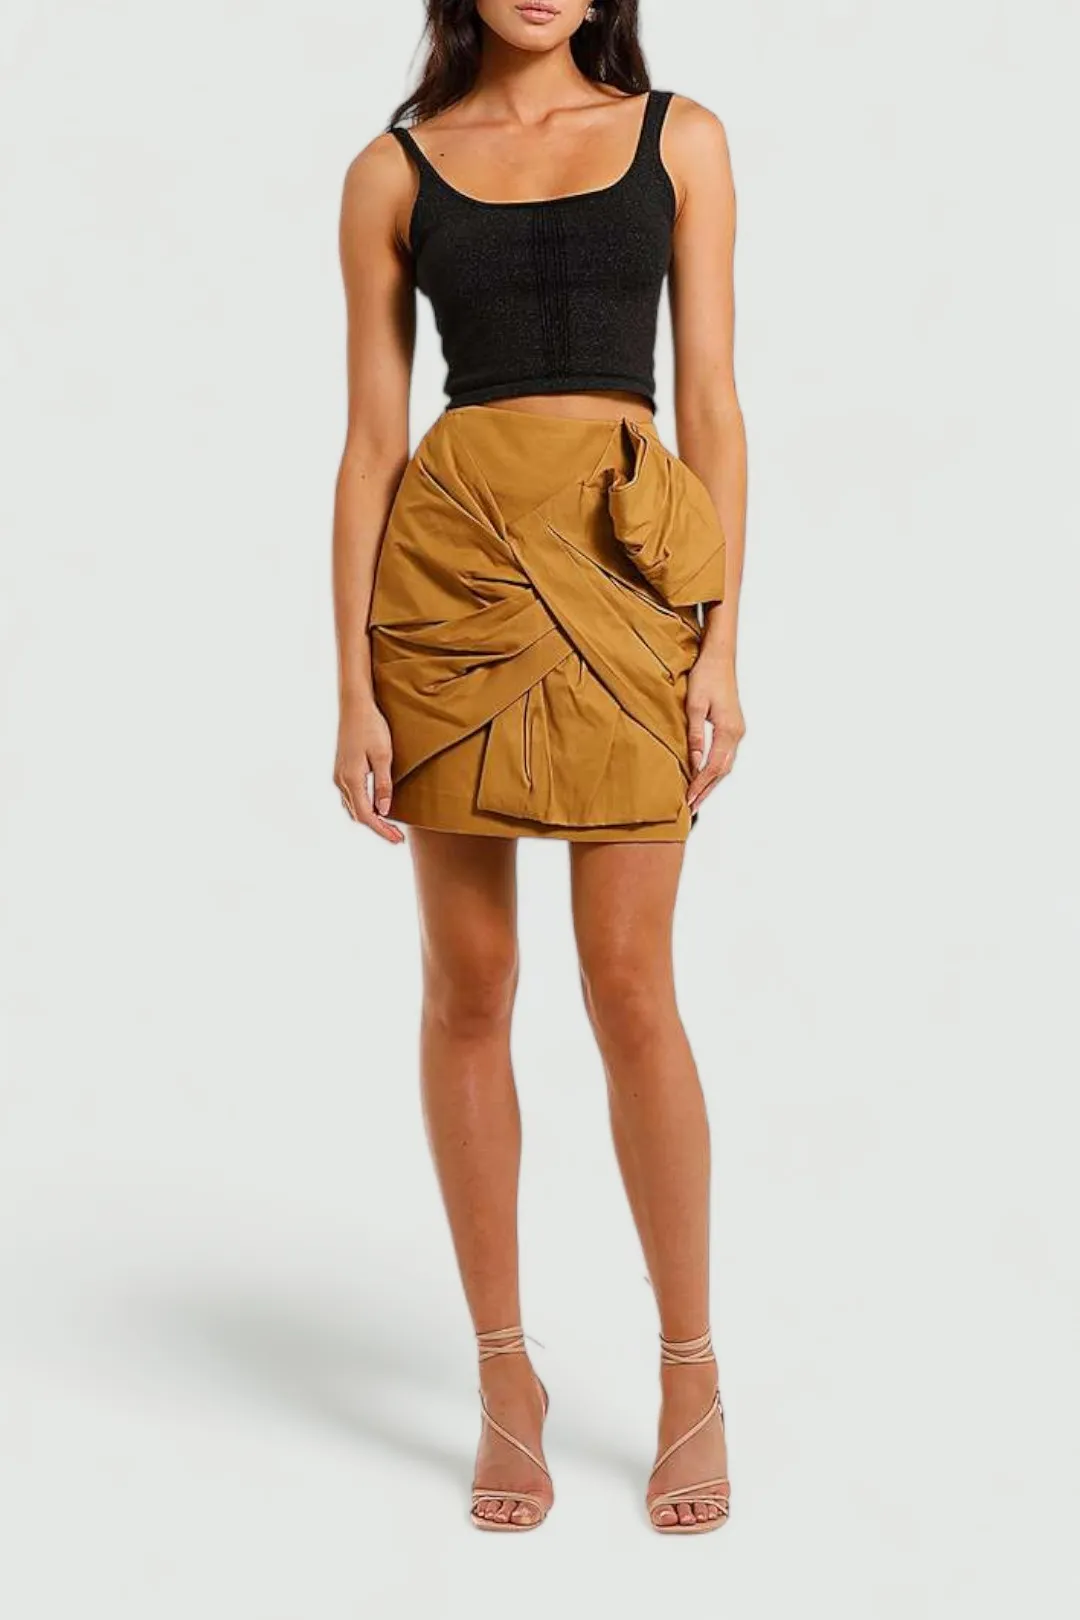 Battan Skirt by Acler for casual looks